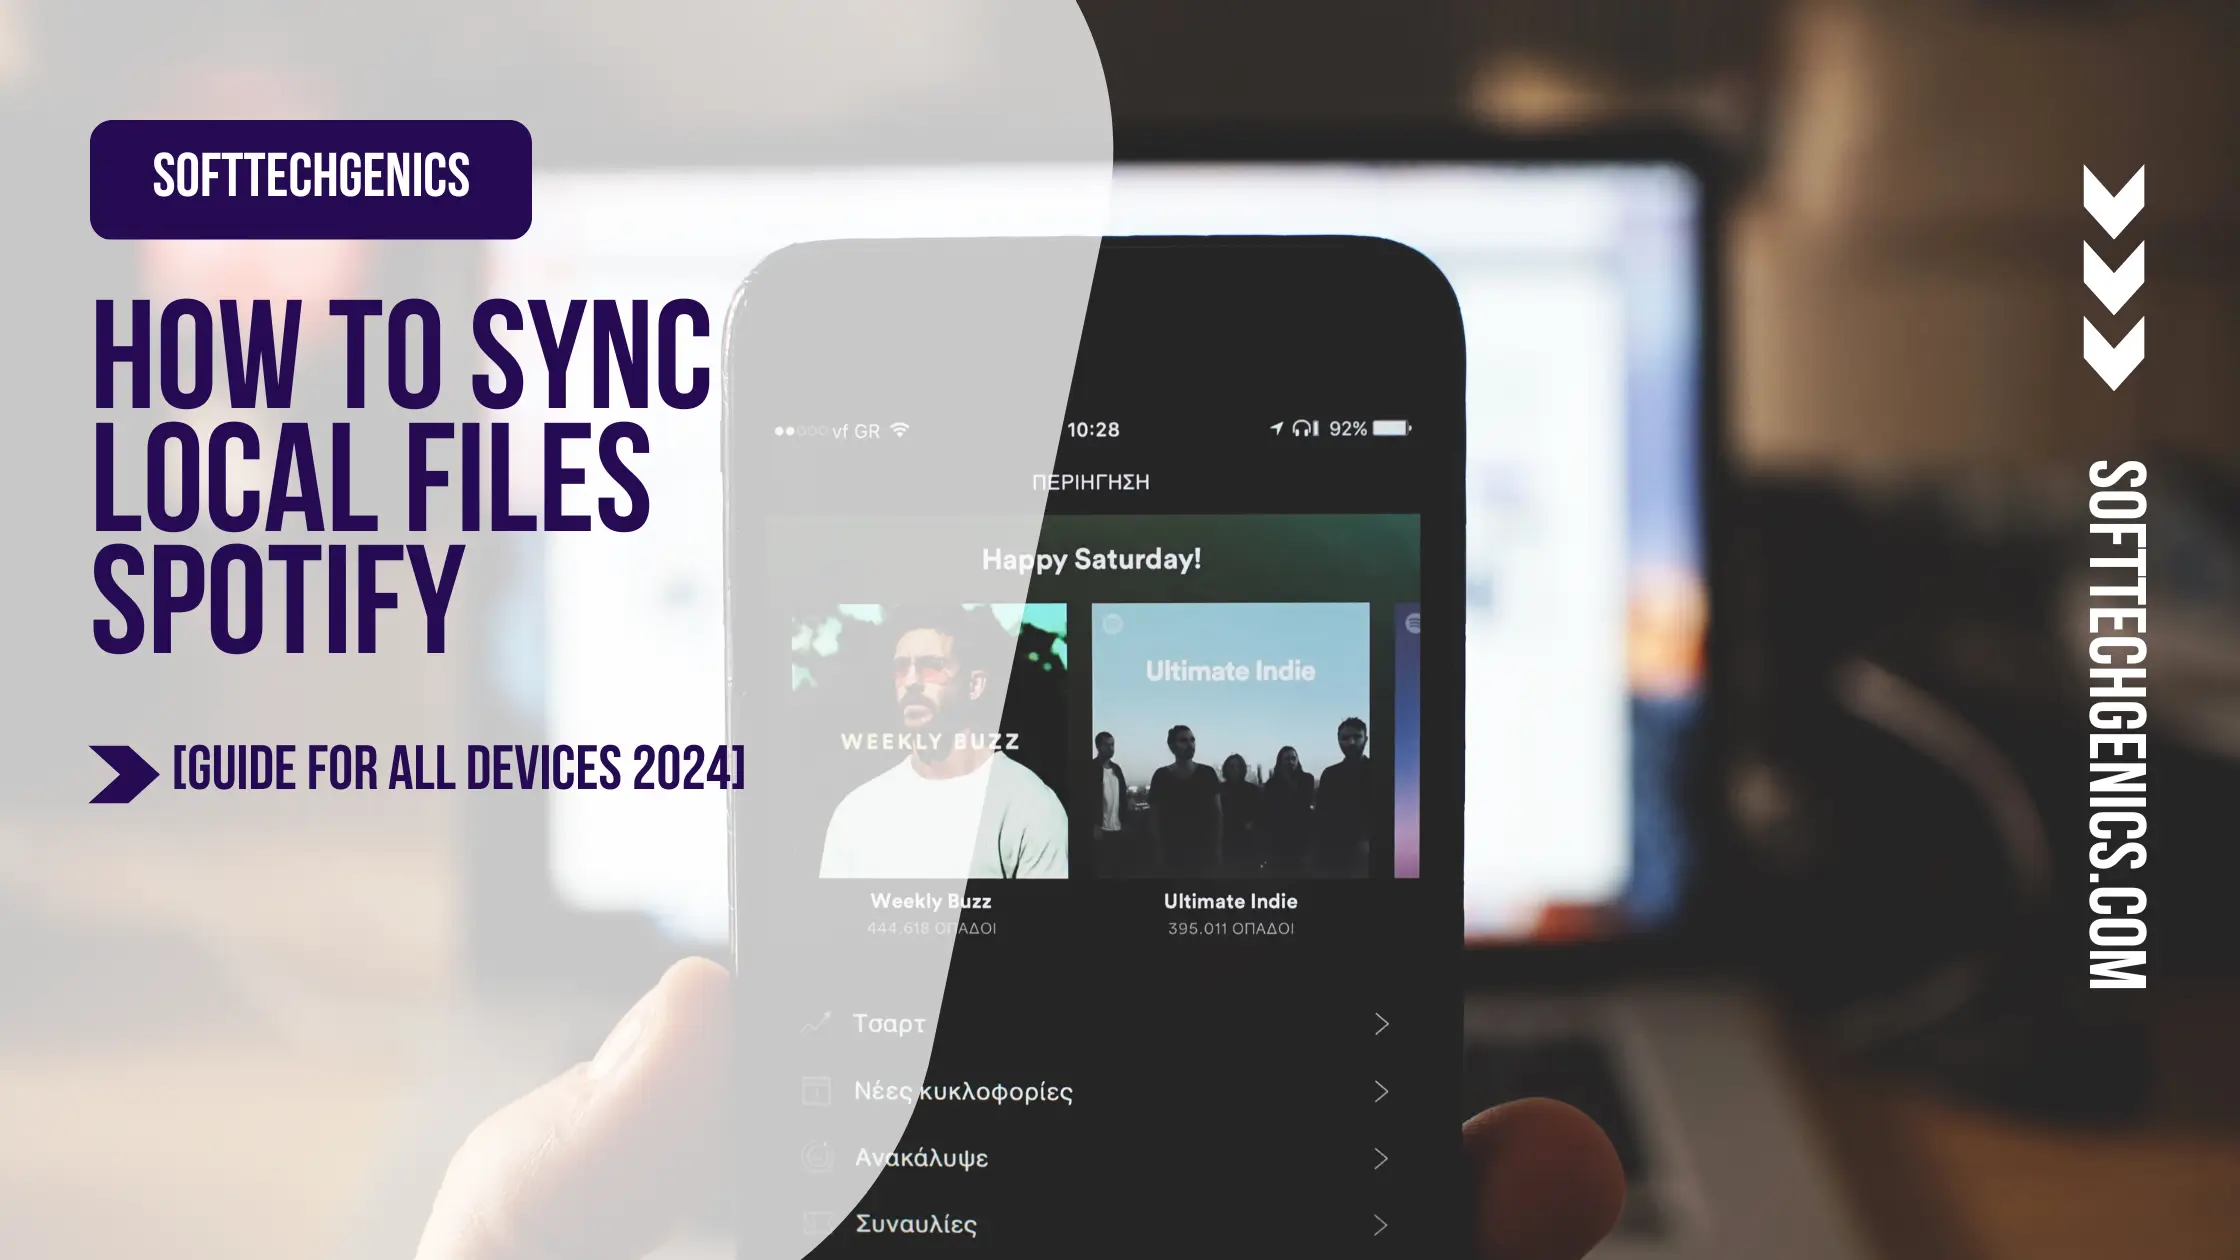 How To Sync Local Files Spotify [Guide For All Devices 2024]